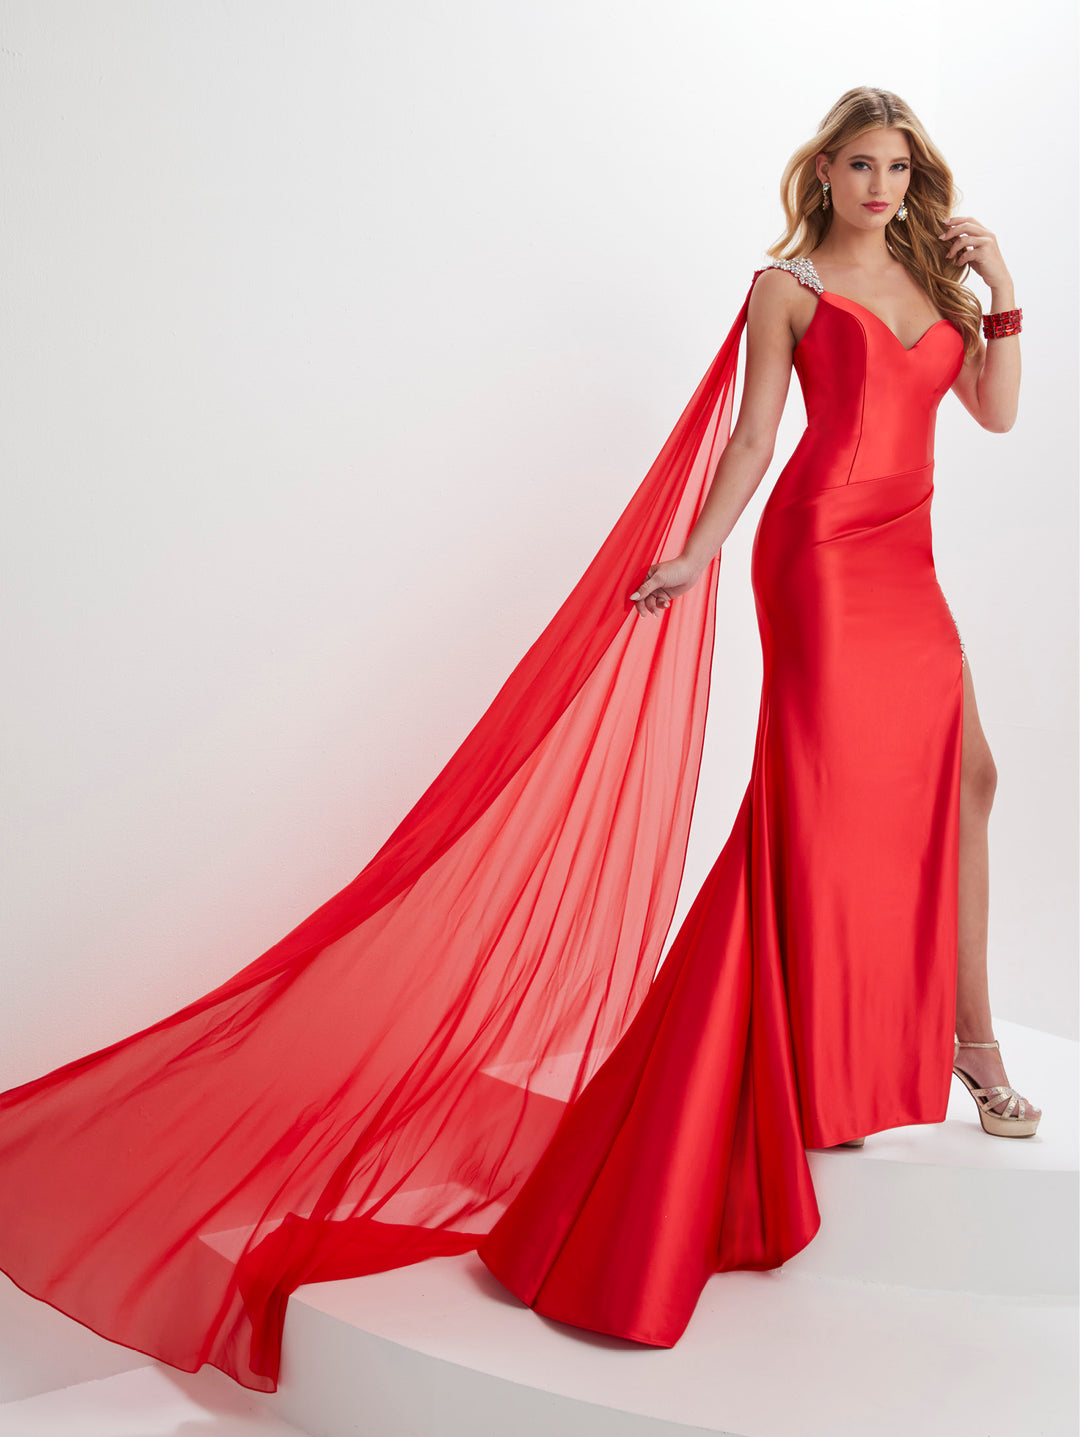 Beaded Spandex One Shoulder Slit Gown by Panoply 14122